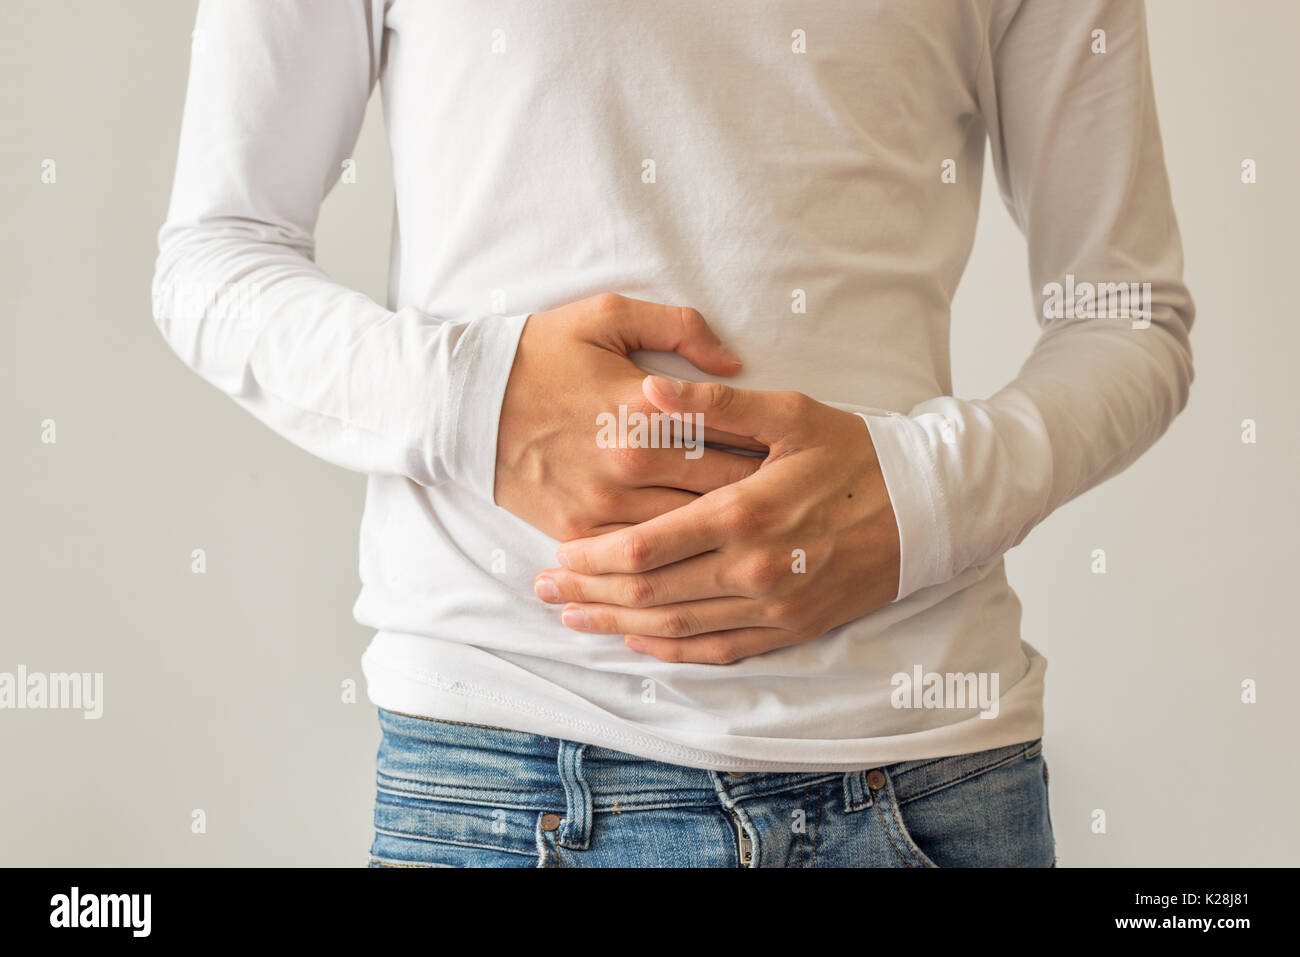 Young man suffering from stomach ache, diarrhea, constipation, acid reflux, indigestion, nausea Stock Photo